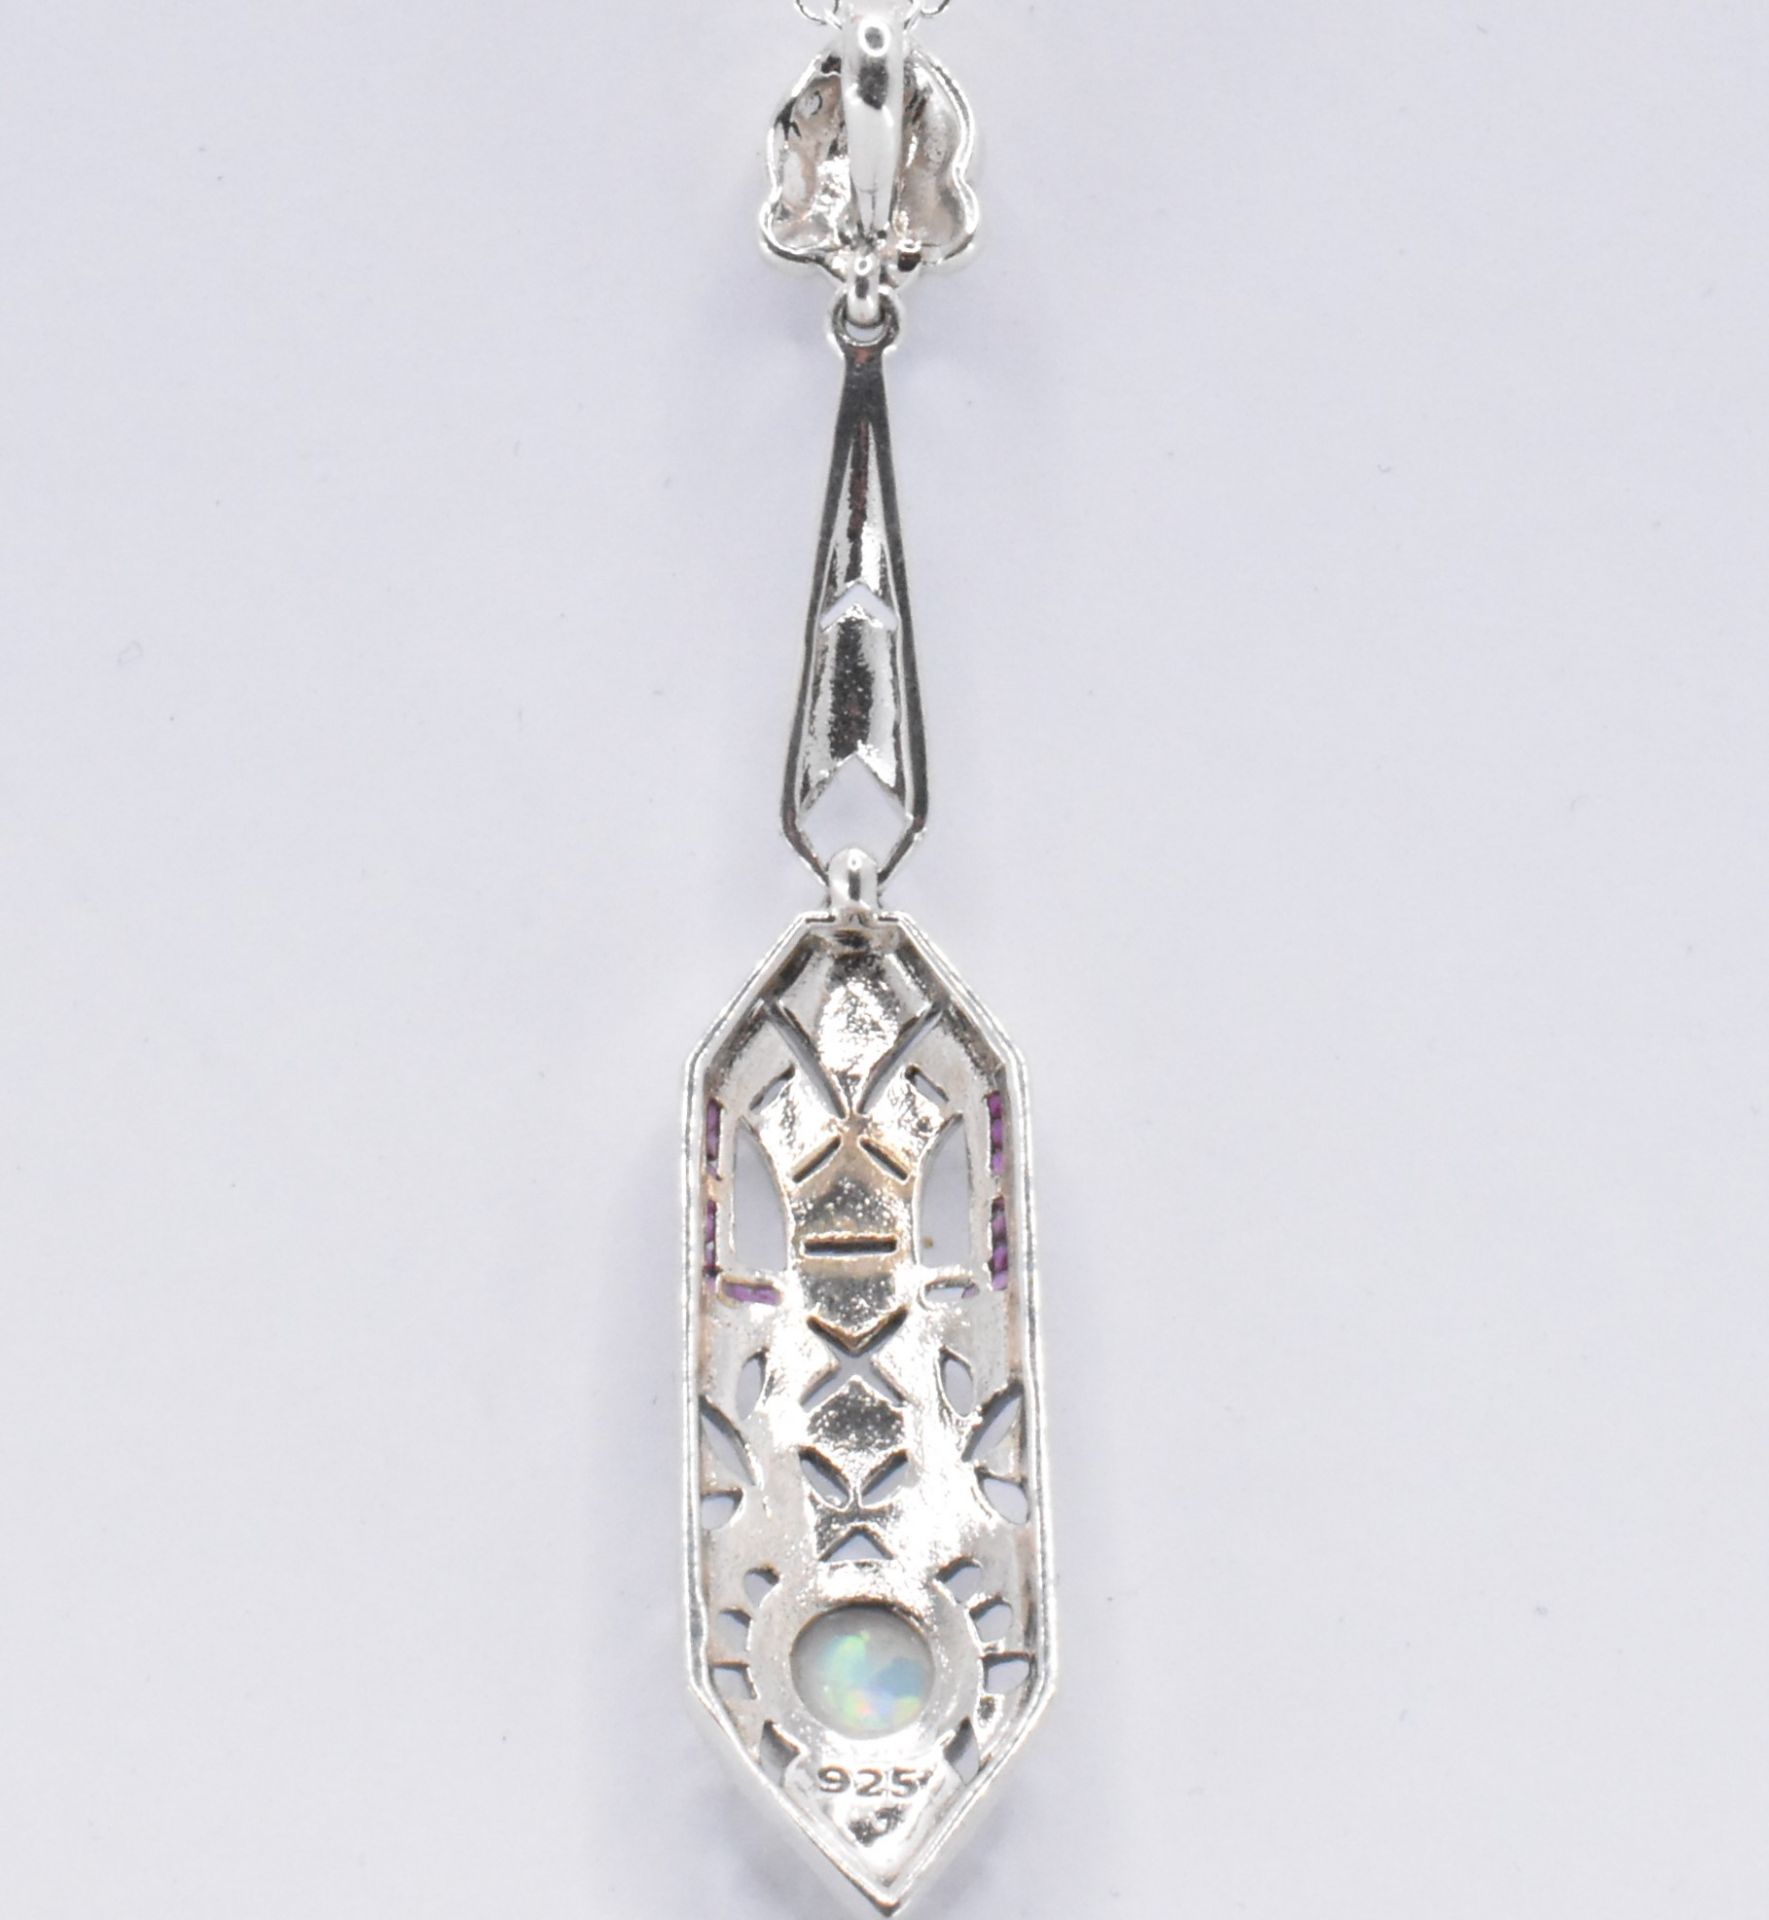 ART DECO STYLE SILVER & OPAL PENDANT NECKLACE - Image 4 of 5